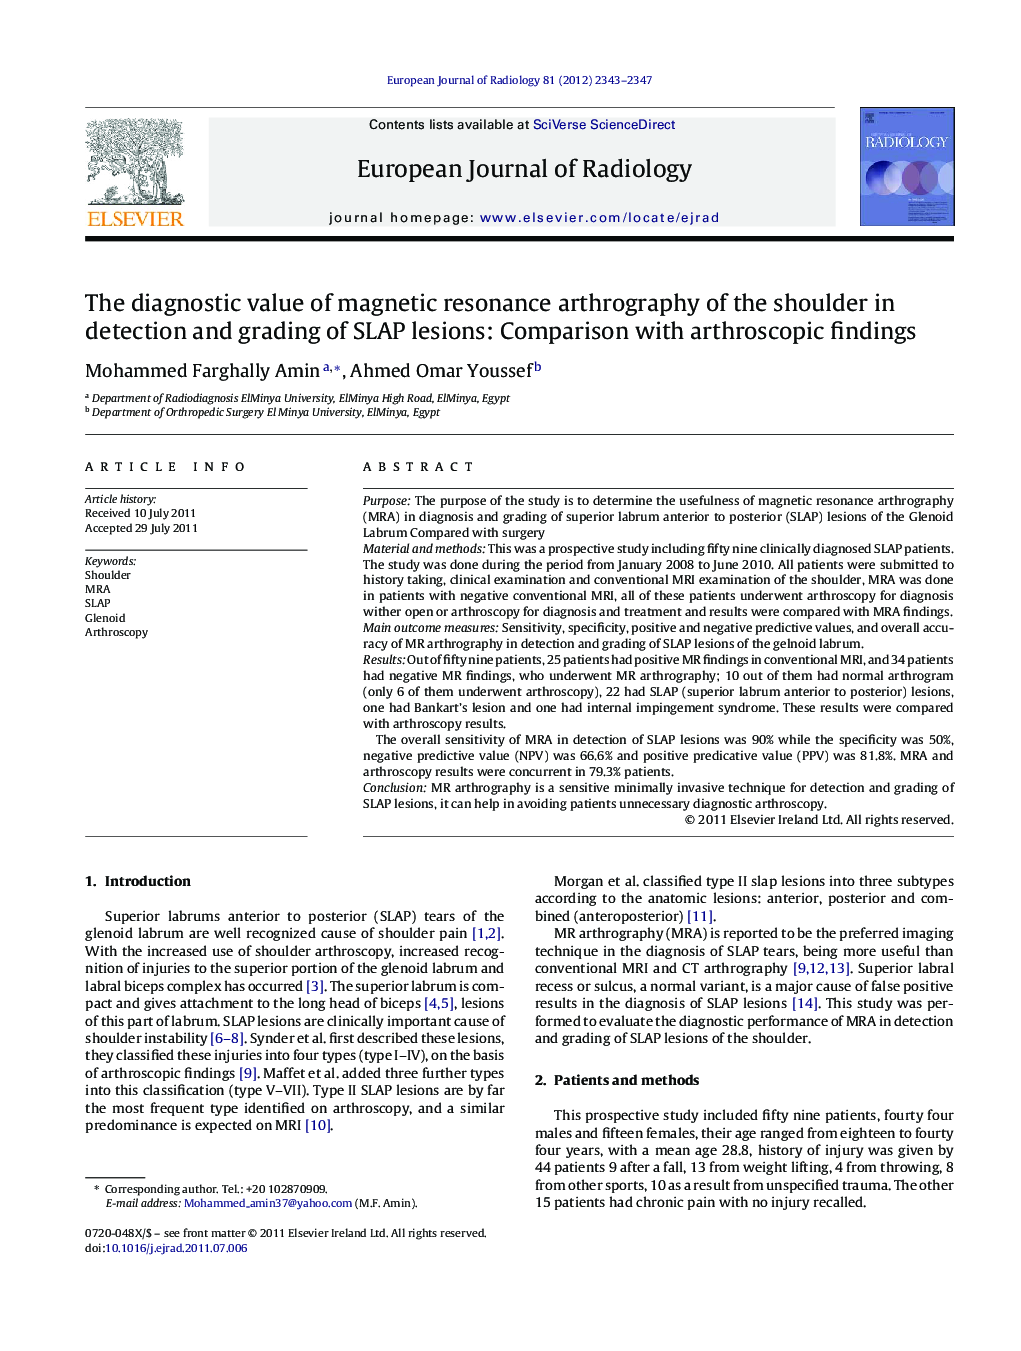 The diagnostic value of magnetic resonance arthrography of the shoulder in detection and grading of SLAP lesions: Comparison with arthroscopic findings